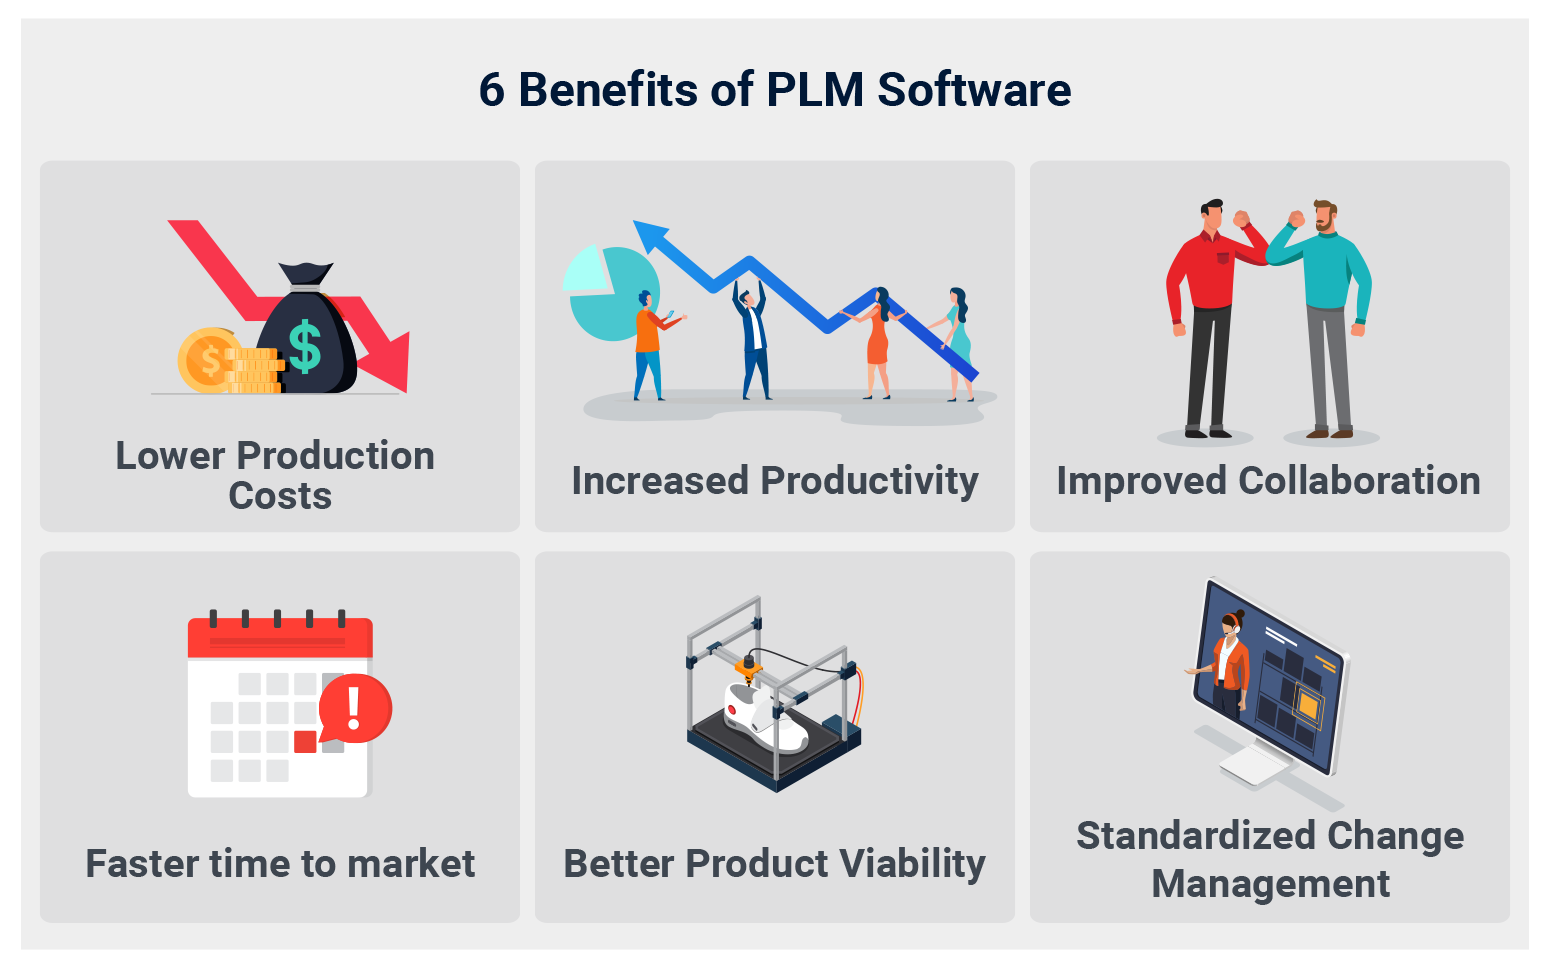 Benefits of Product Lifecycle Management (PLM) Software